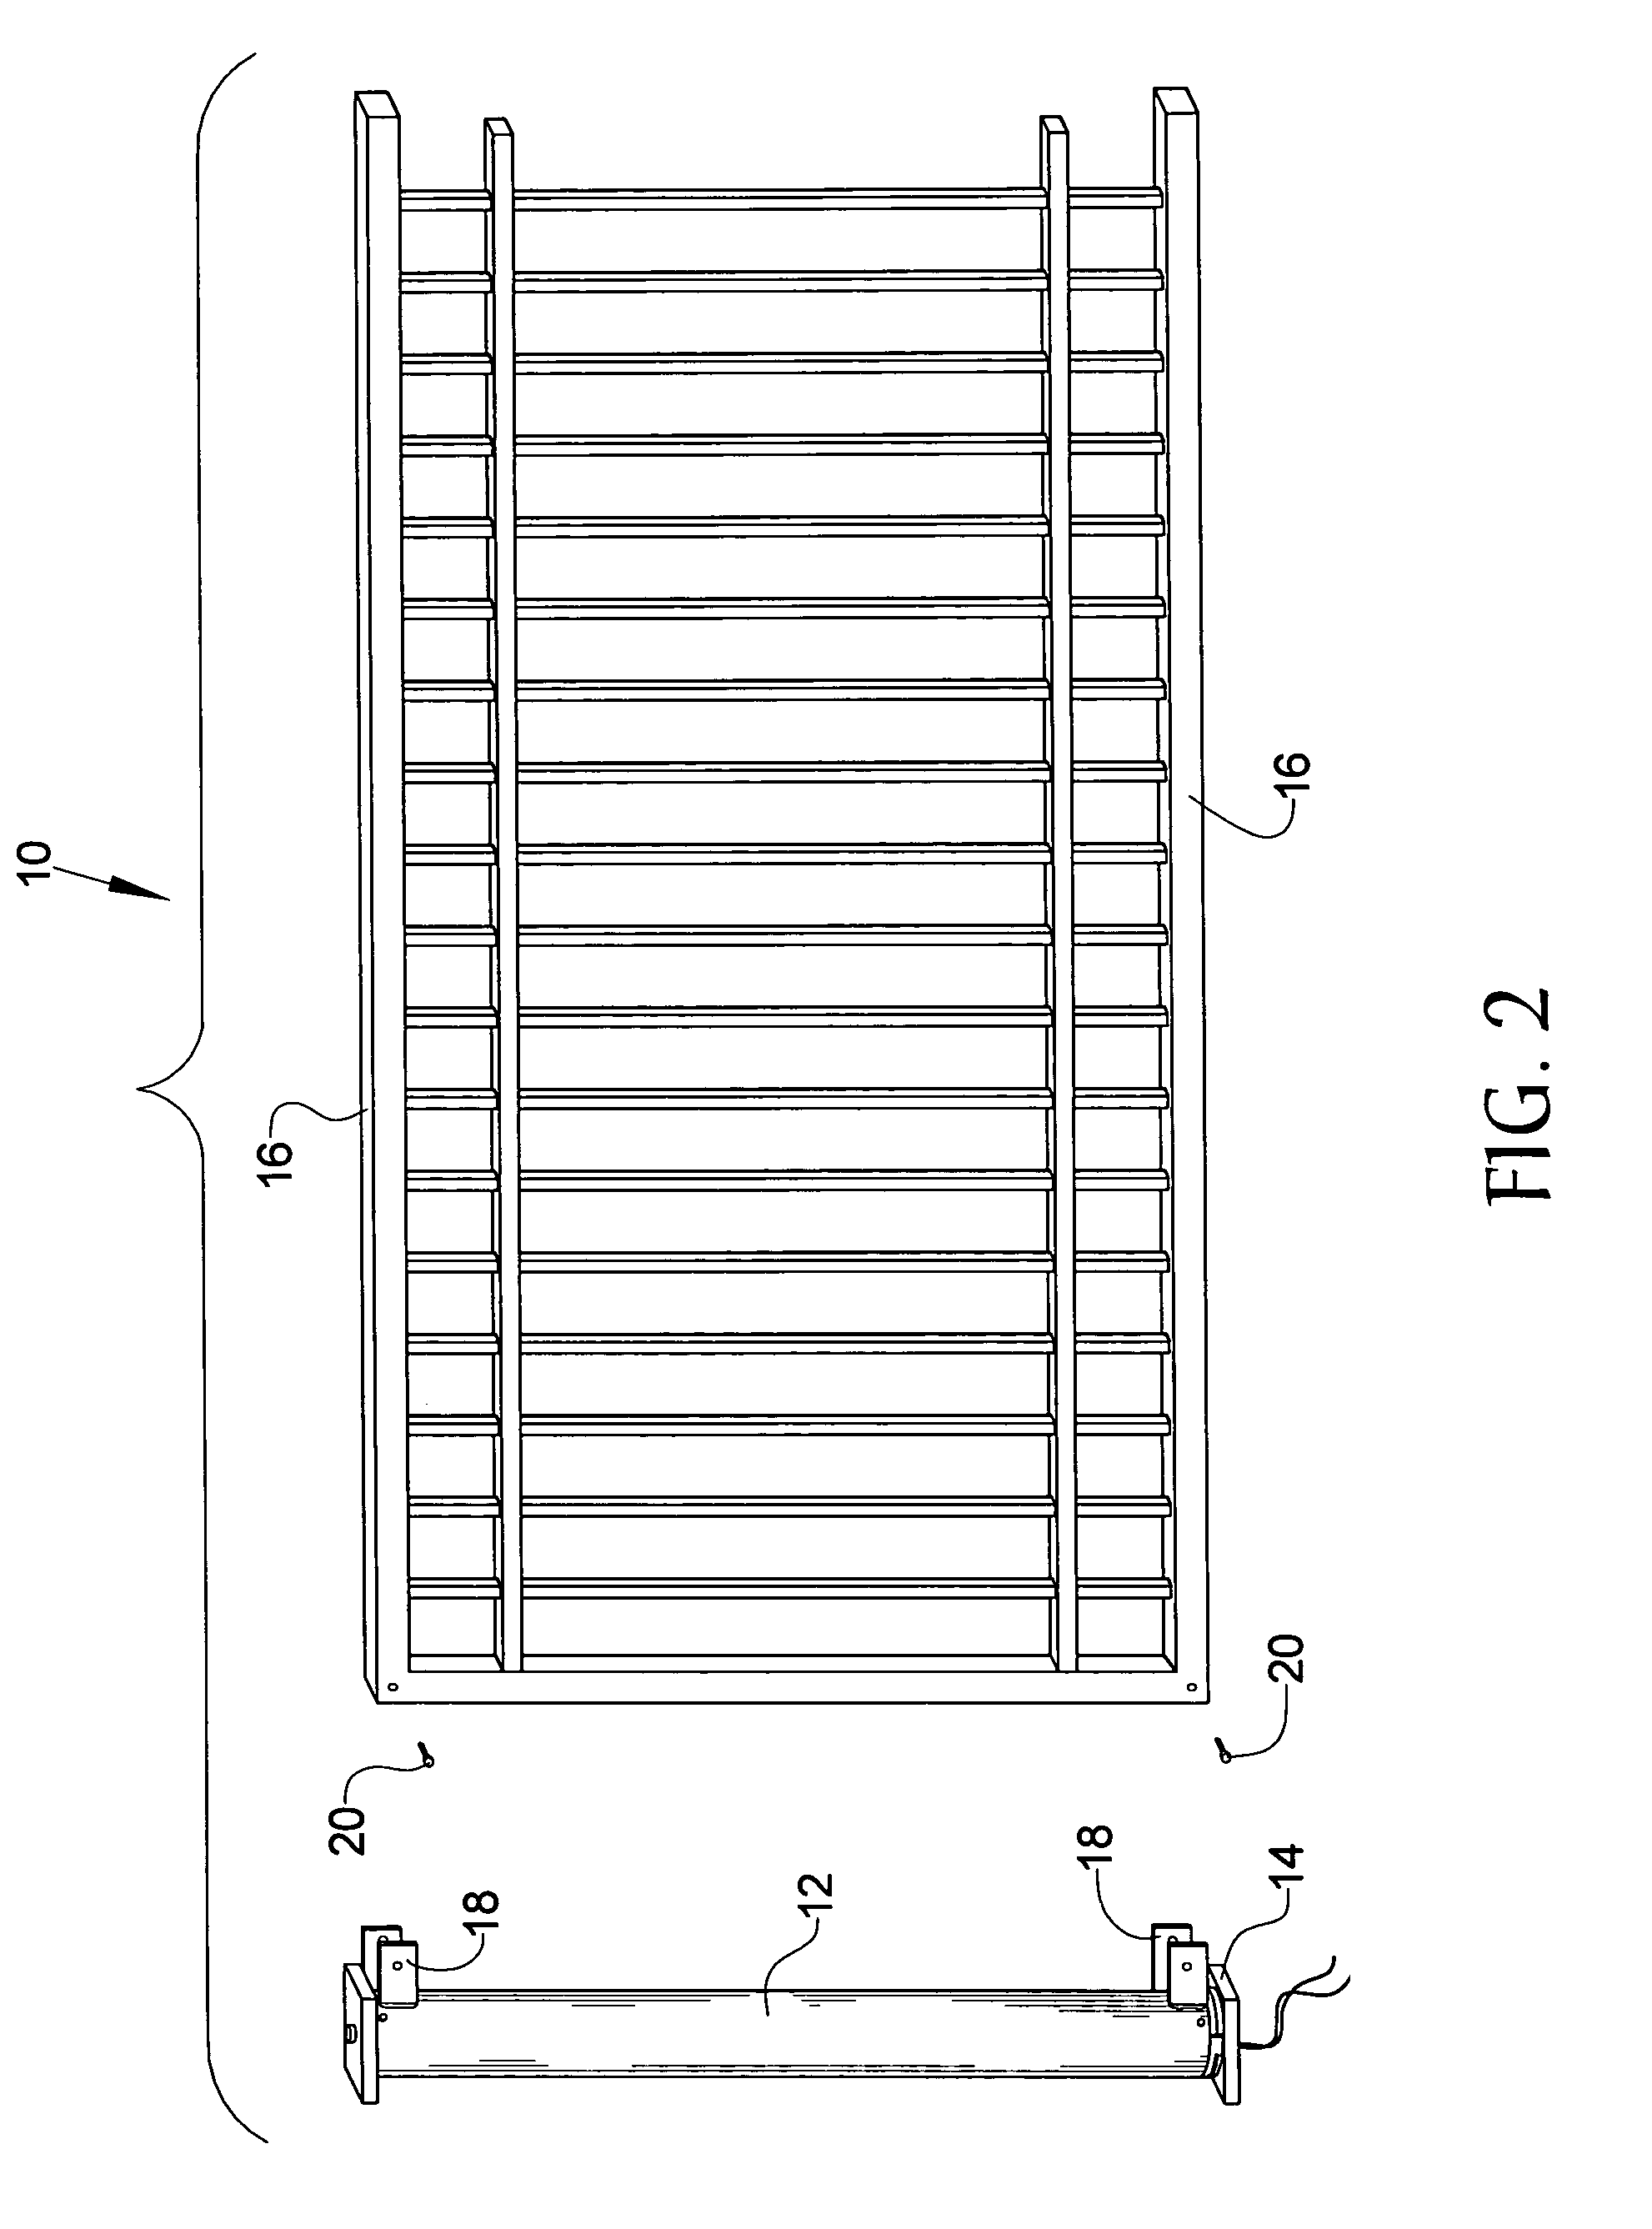 Gate opening and closing apparatus